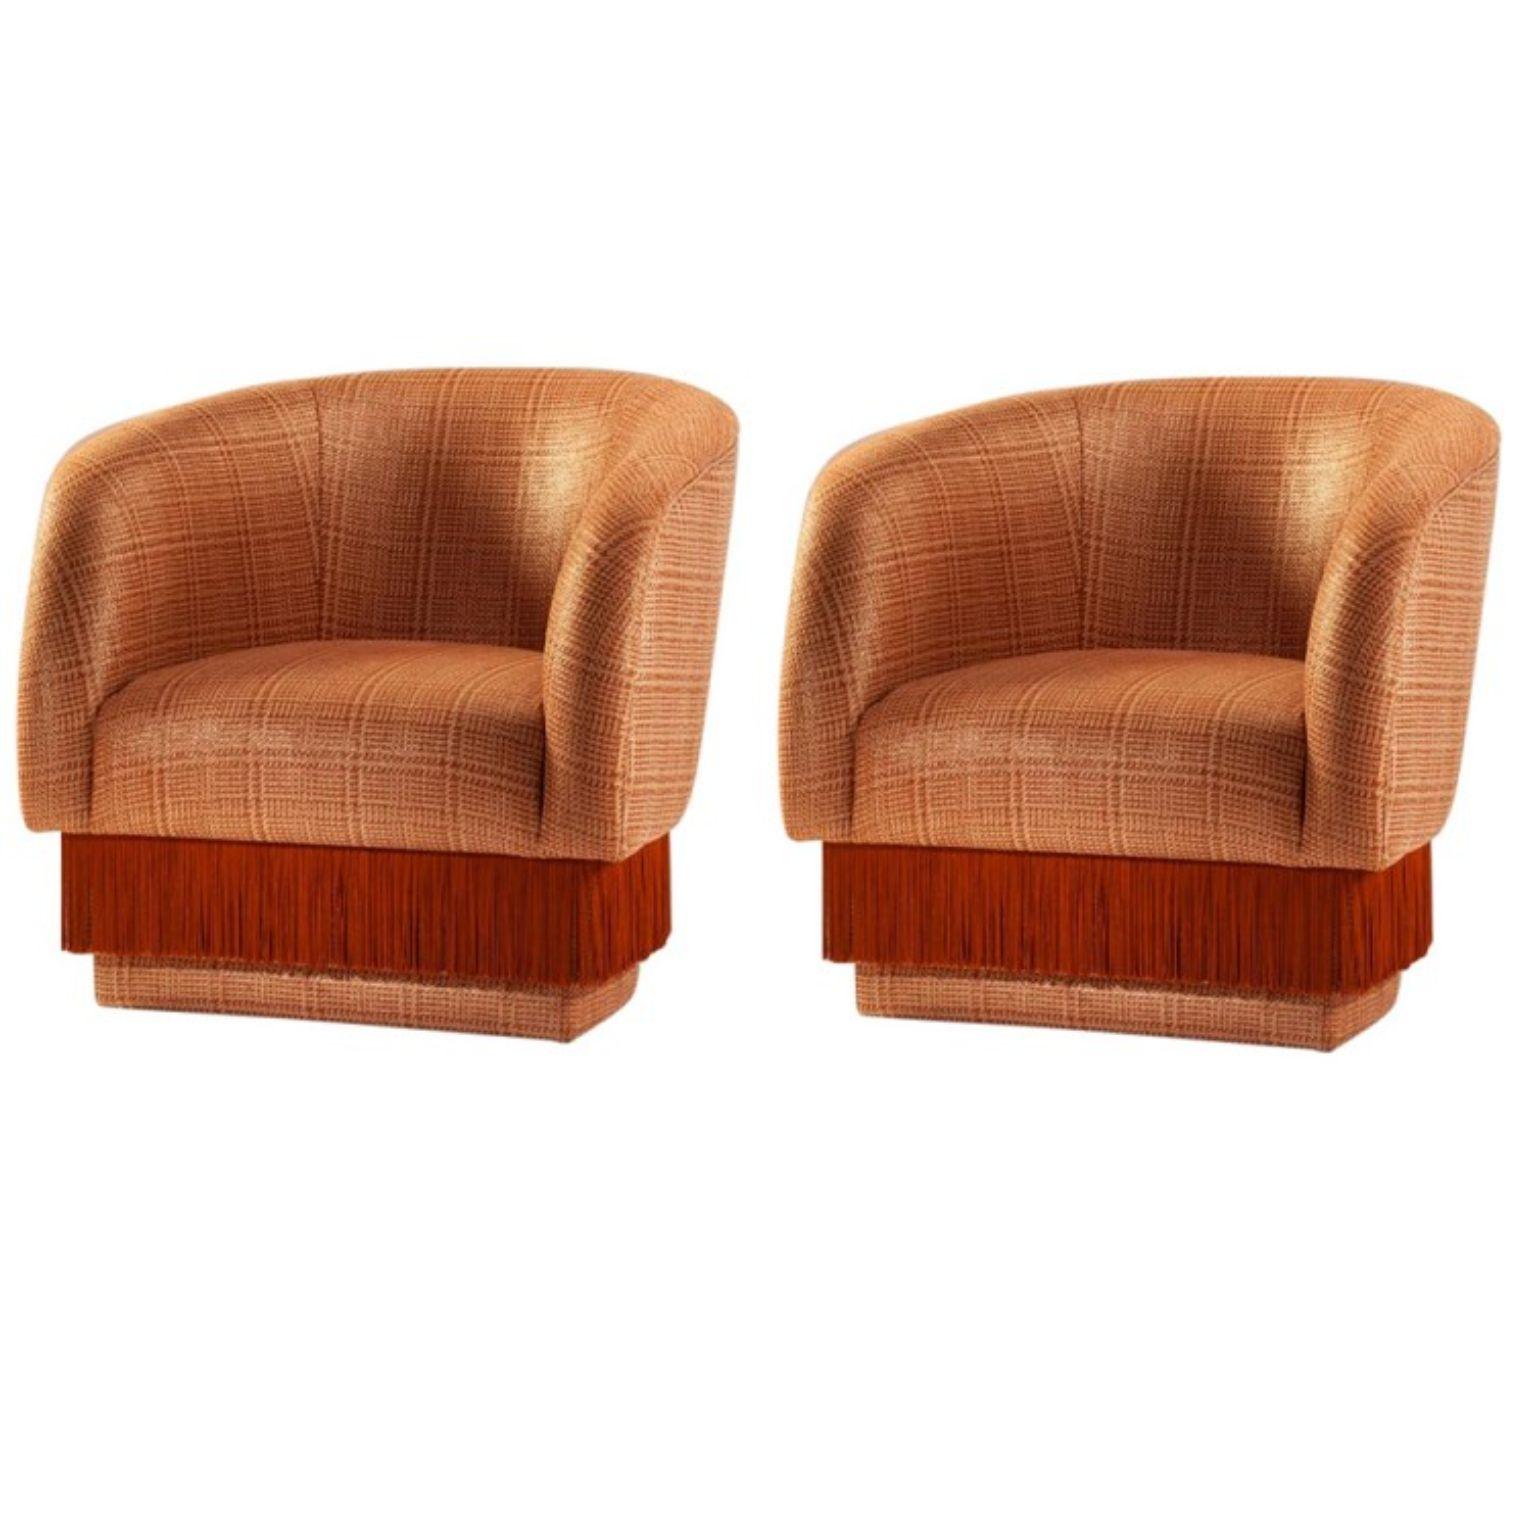 Set of 2 Folie Armchairs by Dooq
Measures: W 82 cm 32”
D 70 cm 28”
H 75 cm 30”
Seat height 42 cm 17”

Materials: upholstery and piping fabric or leather, fringes.

Dooq is a design company dedicated to celebrate the luxury of living. Creating